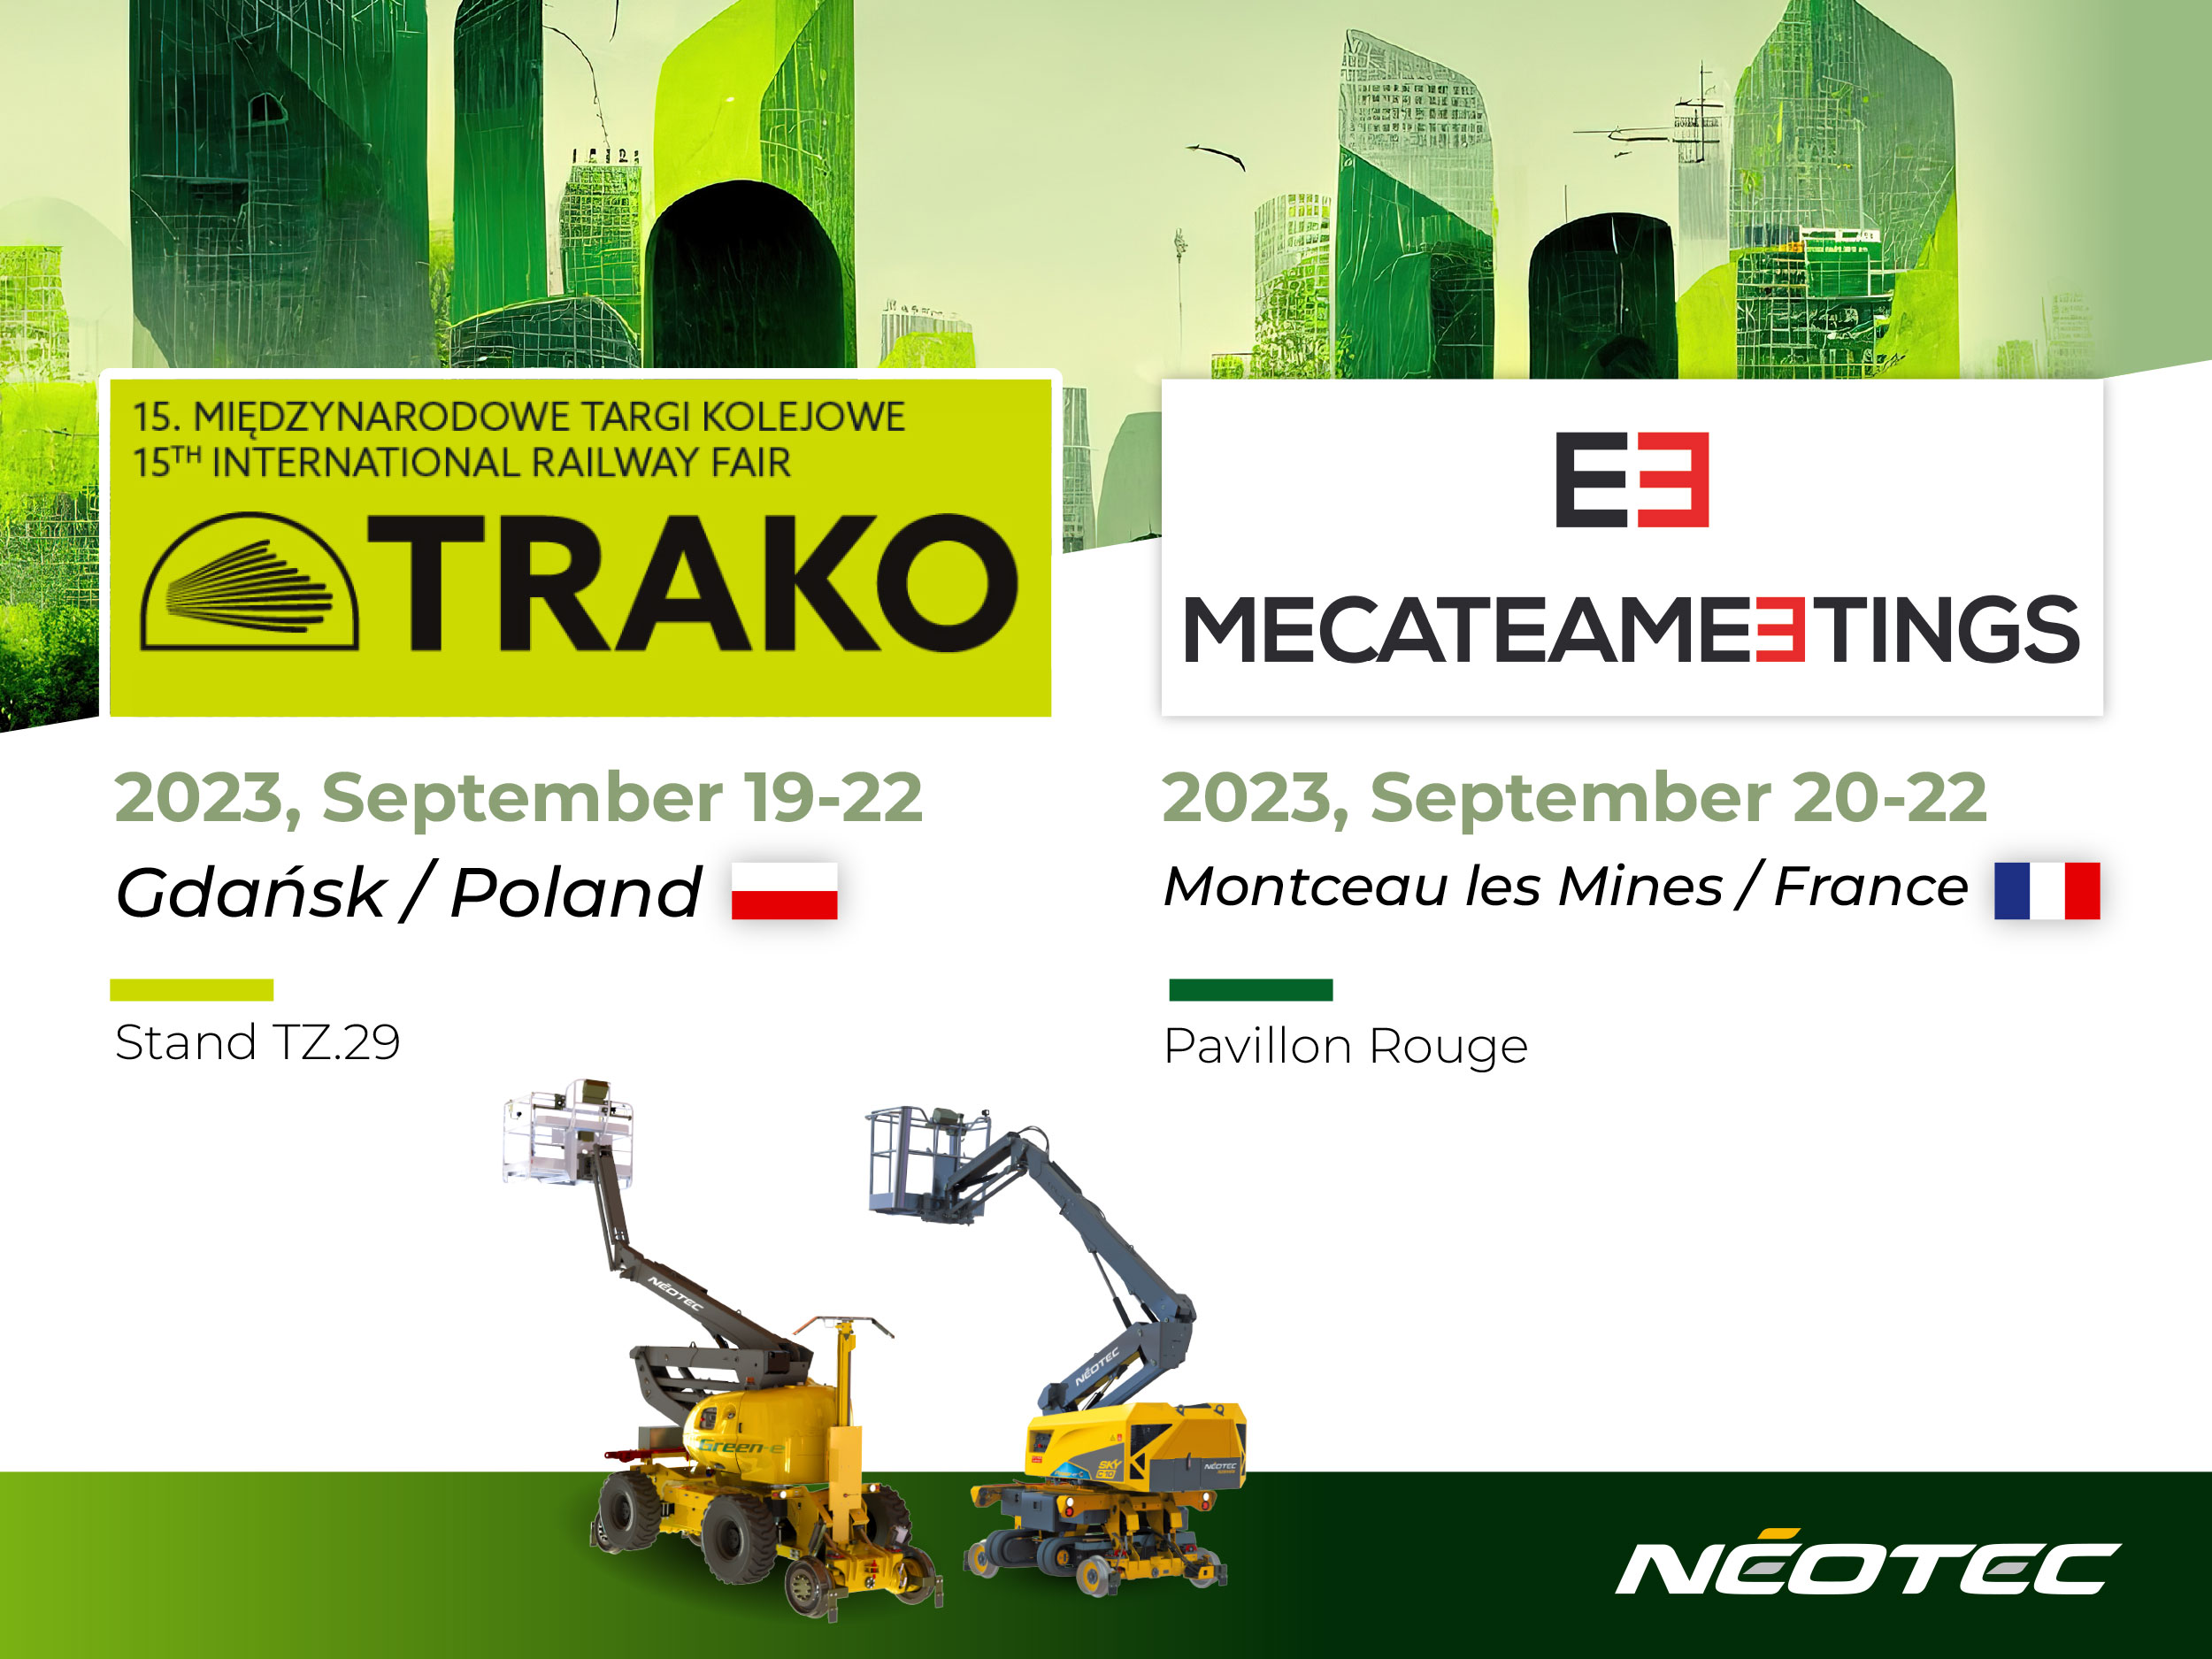 Neotec welcomes you at TRAKO and MECATEAMEETINGS 2023